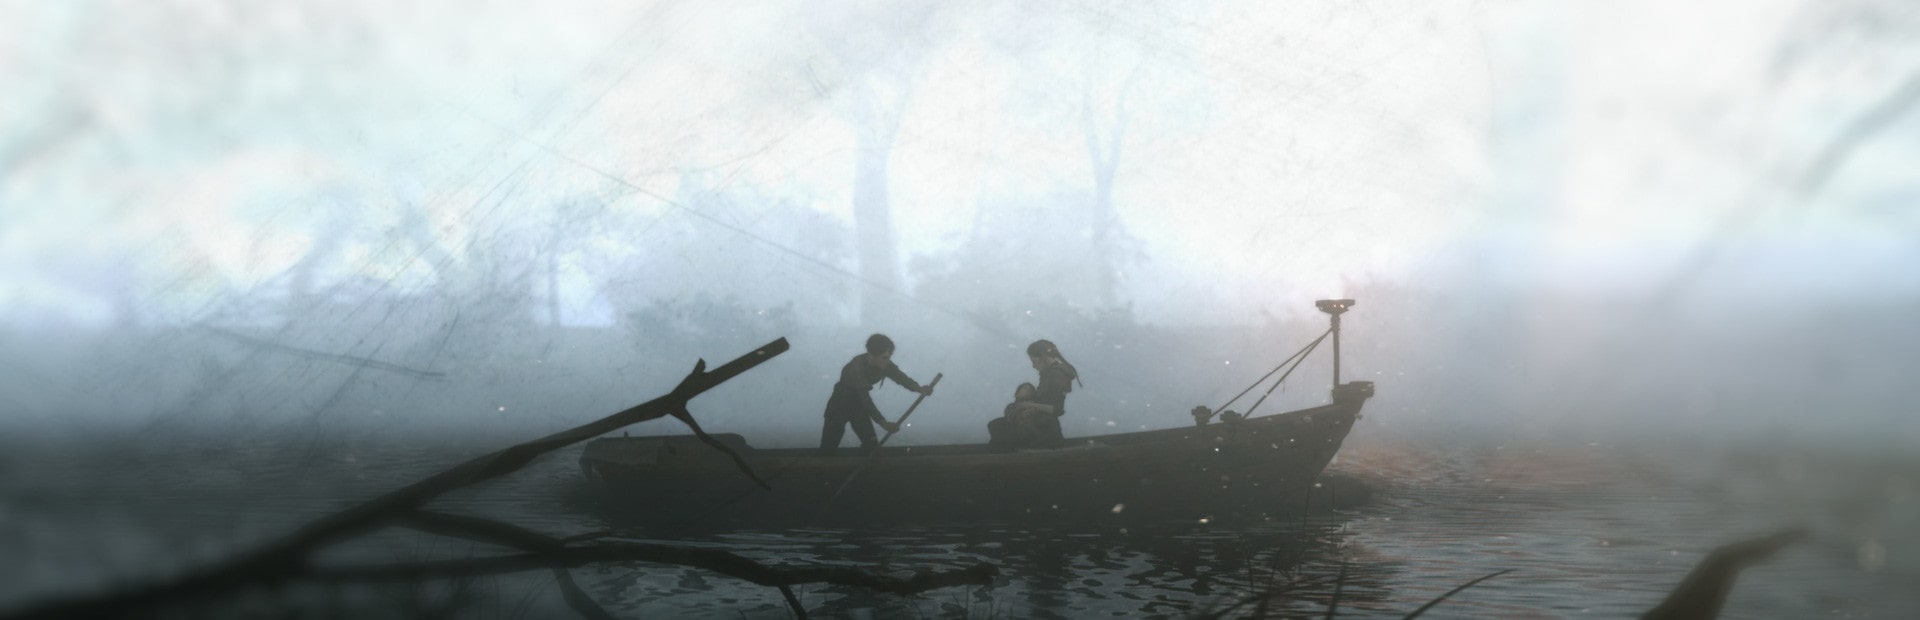 More Games Like A Plague Tale: Innocence